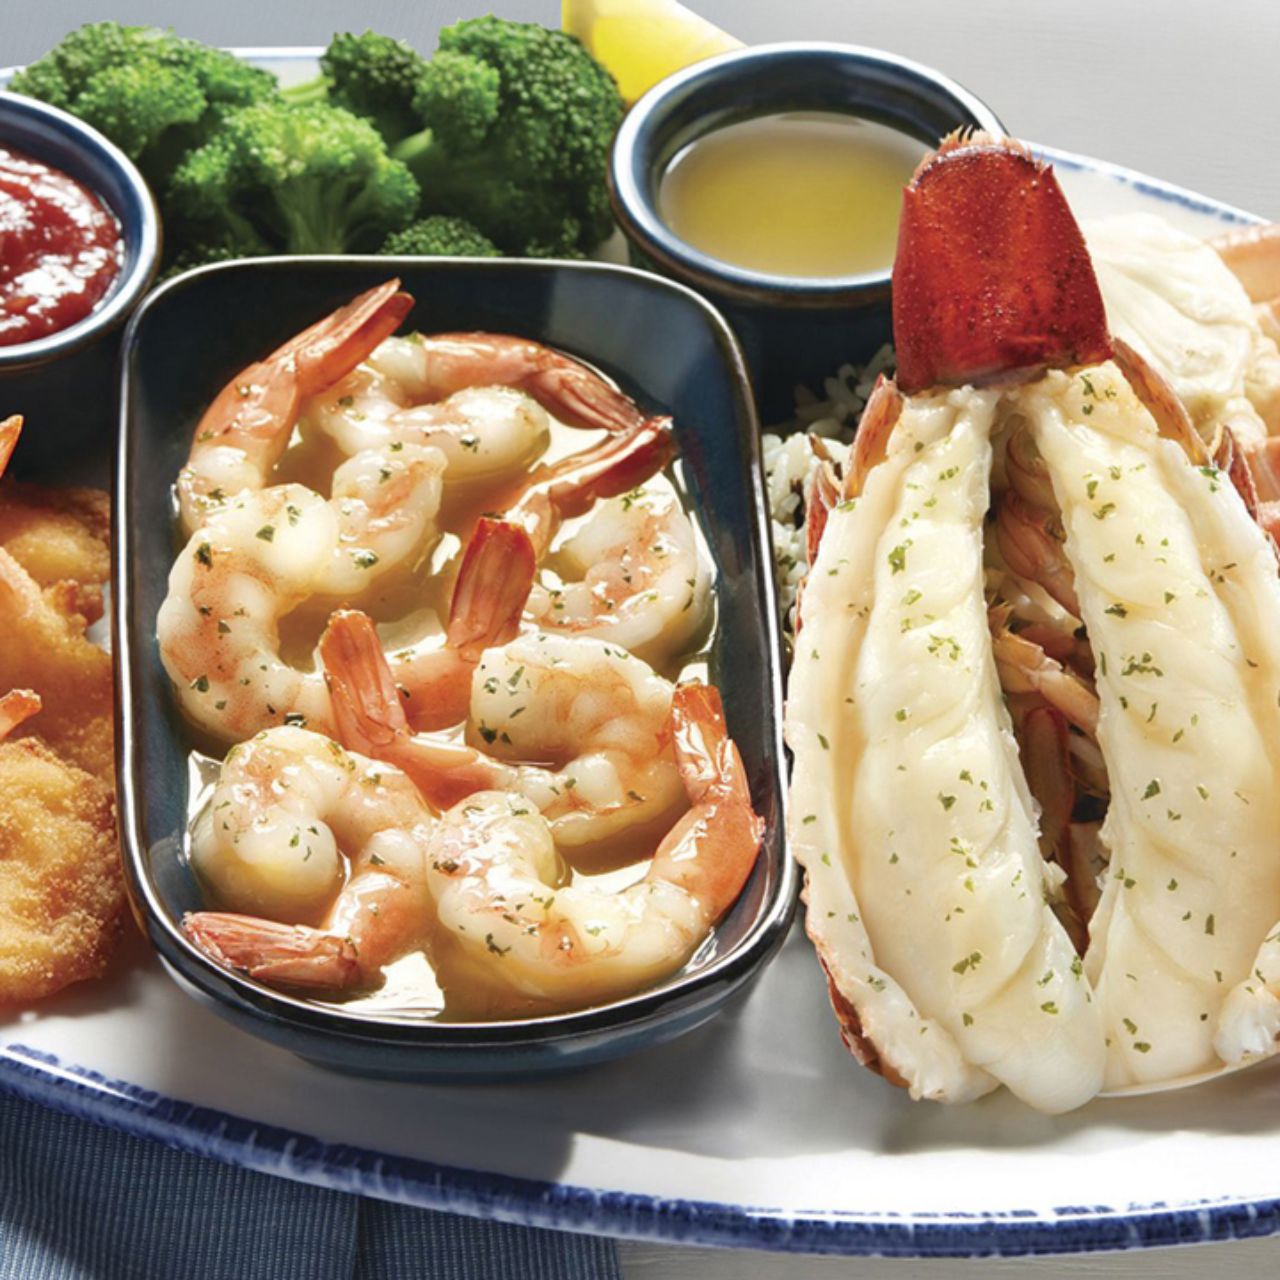 Red Lobster Bronx Bronx Ny Opentable [ 1280 x 1280 Pixel ]